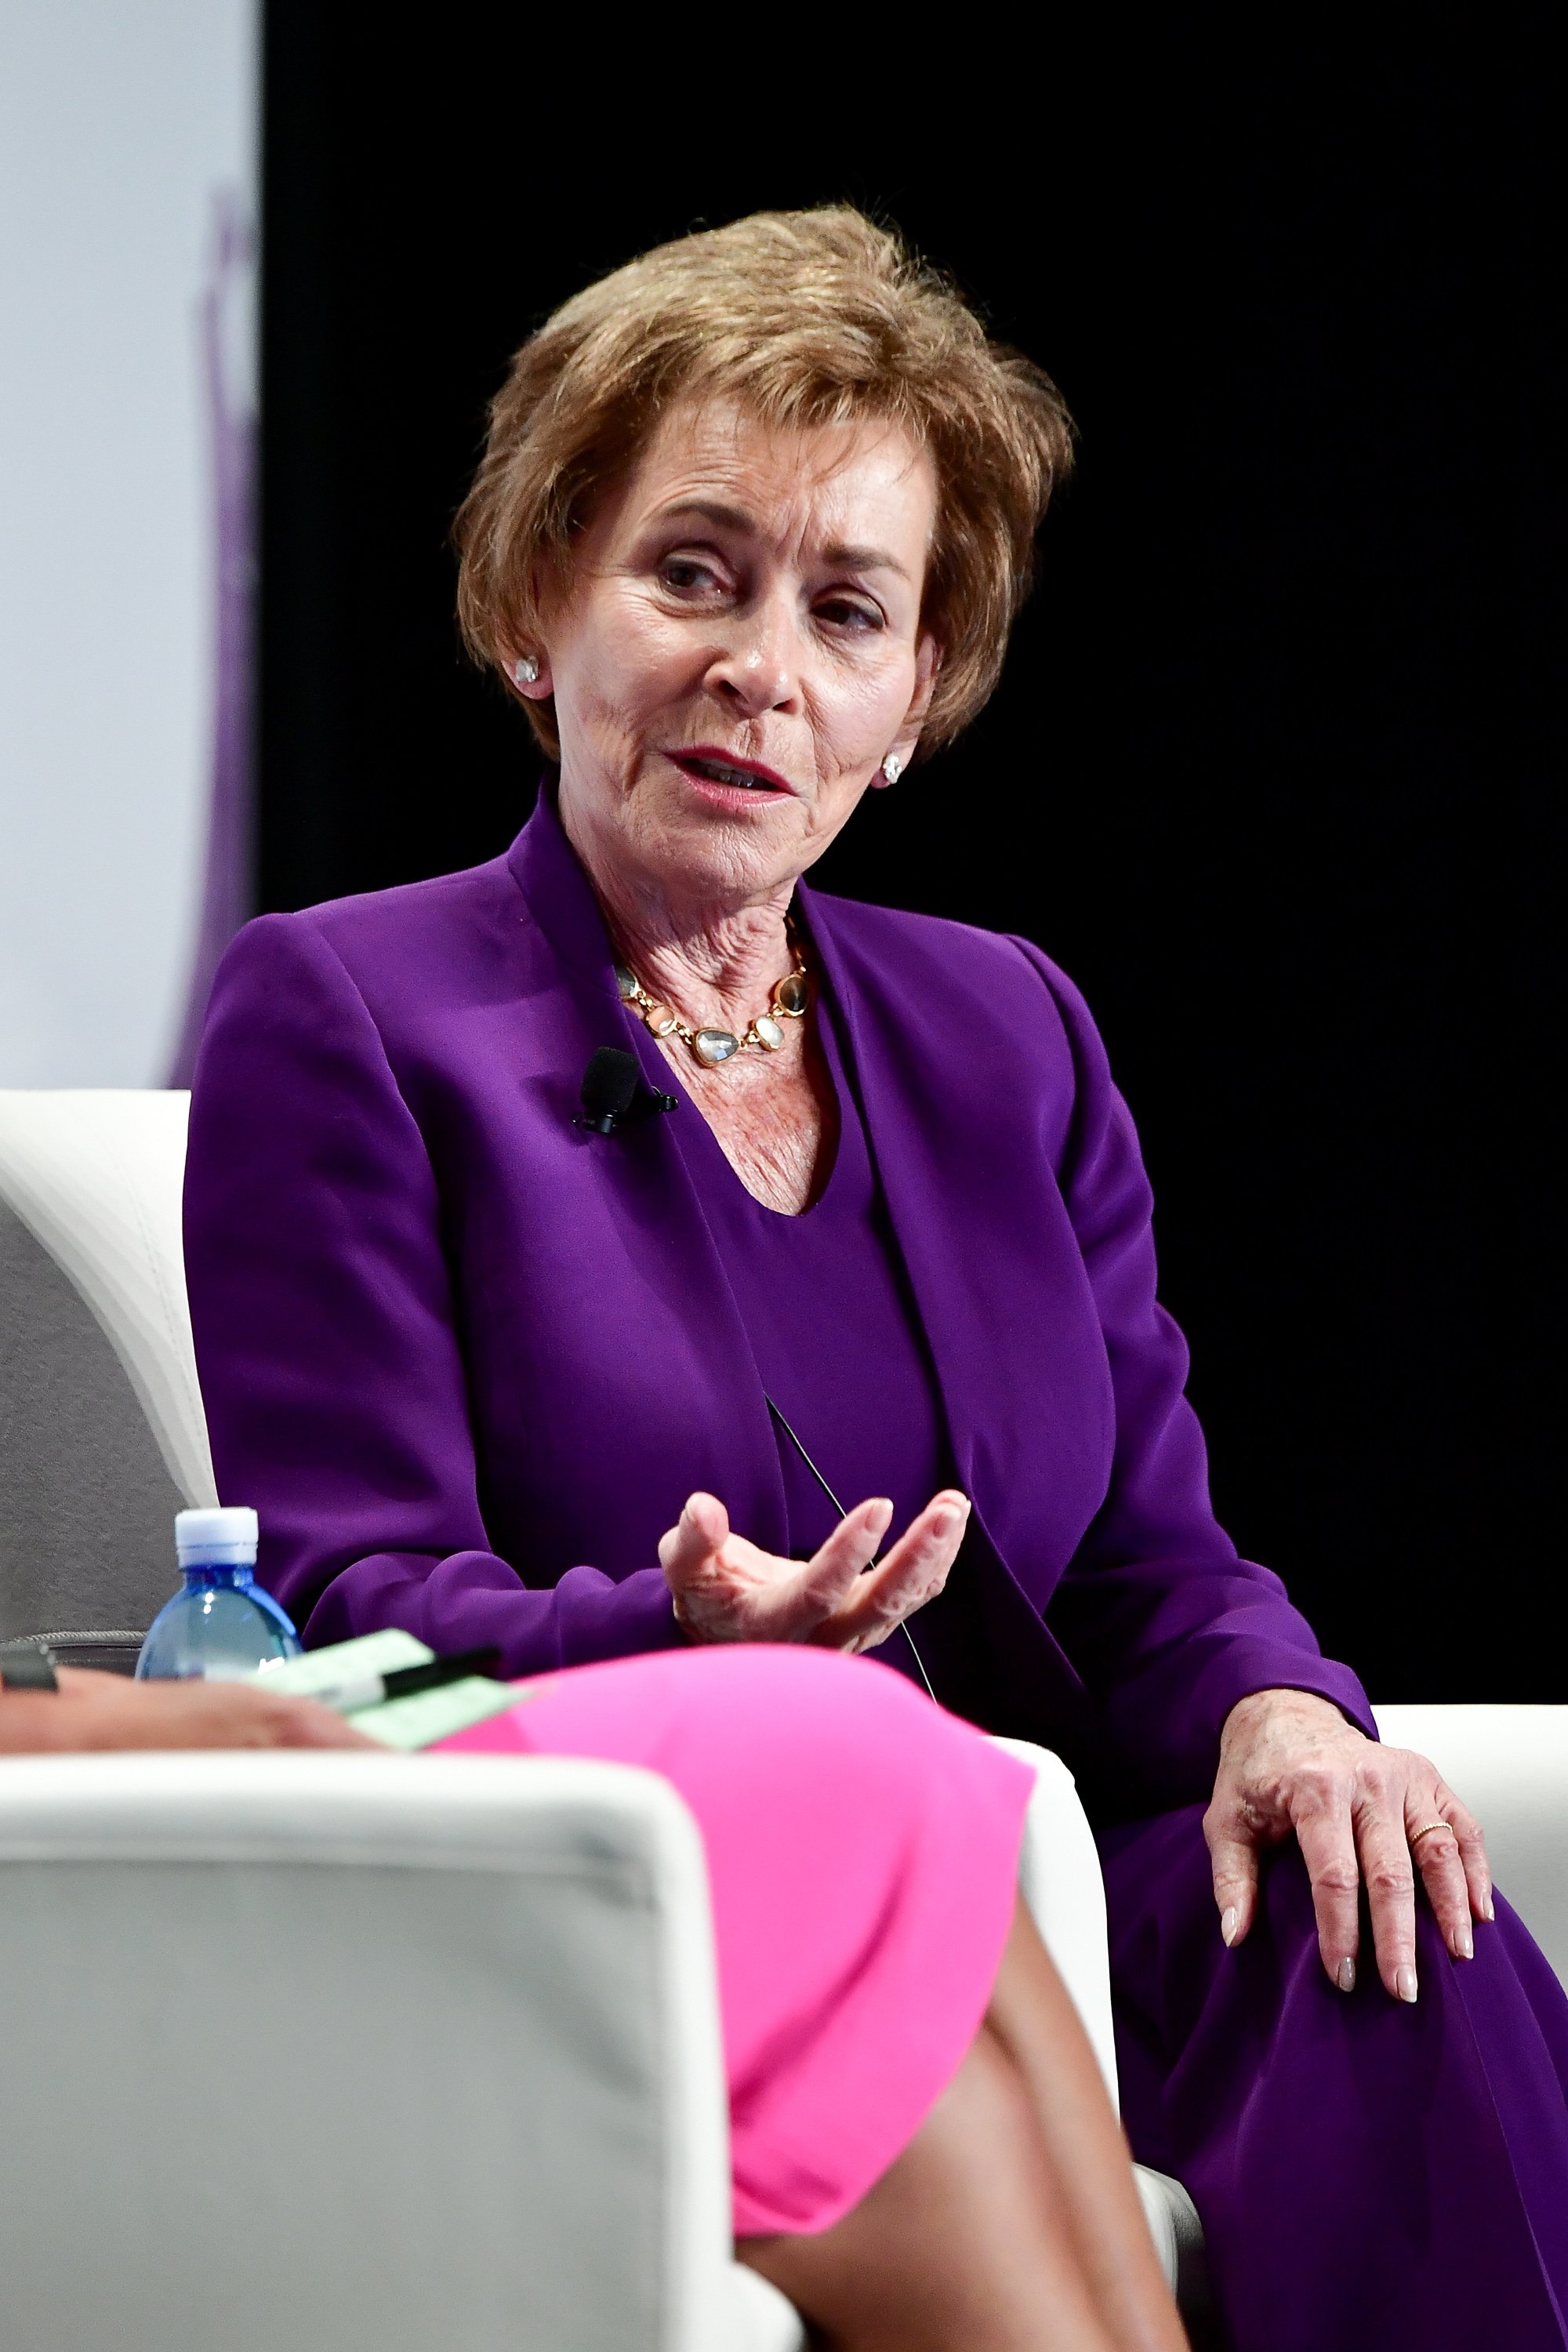 Judge Judy Sheindline attends the Forbes Women's Summit in New York City on June 13, 2017 | Photo: Getty Images